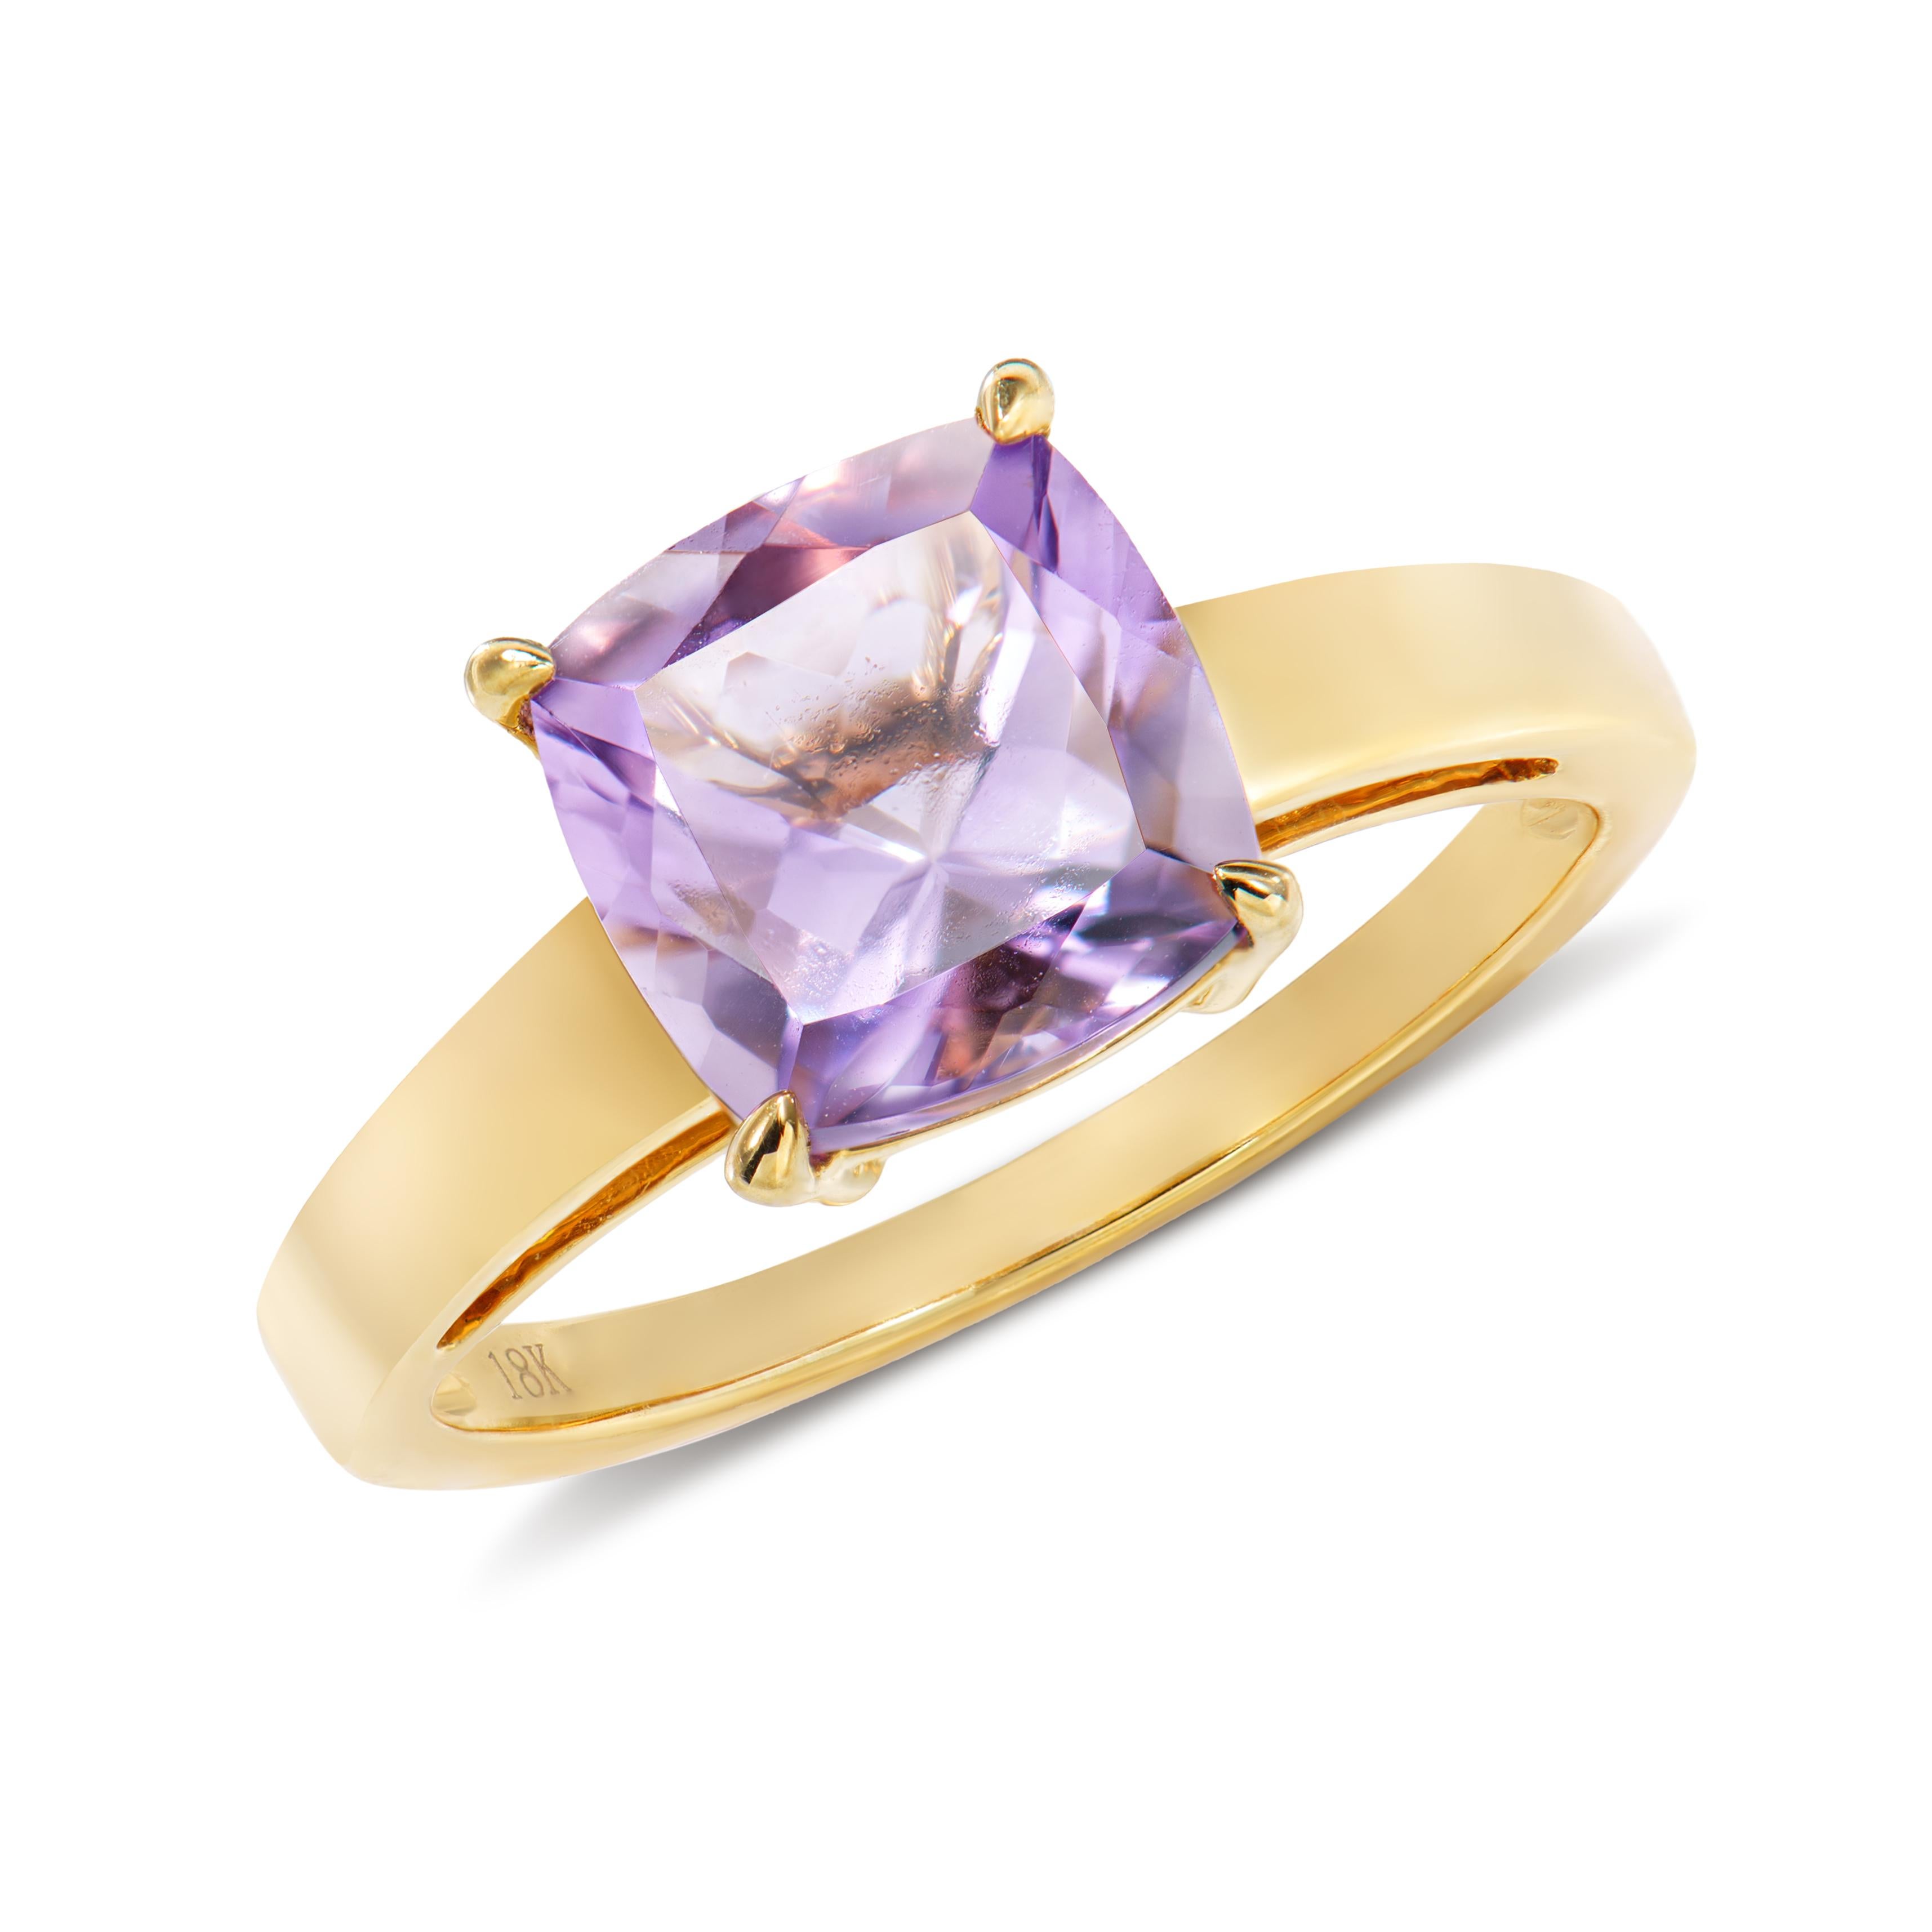 Presented A lovely collection of gems, including Amethyst, Sky Blue Topaz, and Swiss Blue Topaz is perfect for people who value quality and want to wear it to any occasion or celebration. The yellow gold Amethyst Fancy ring offer a classic yet